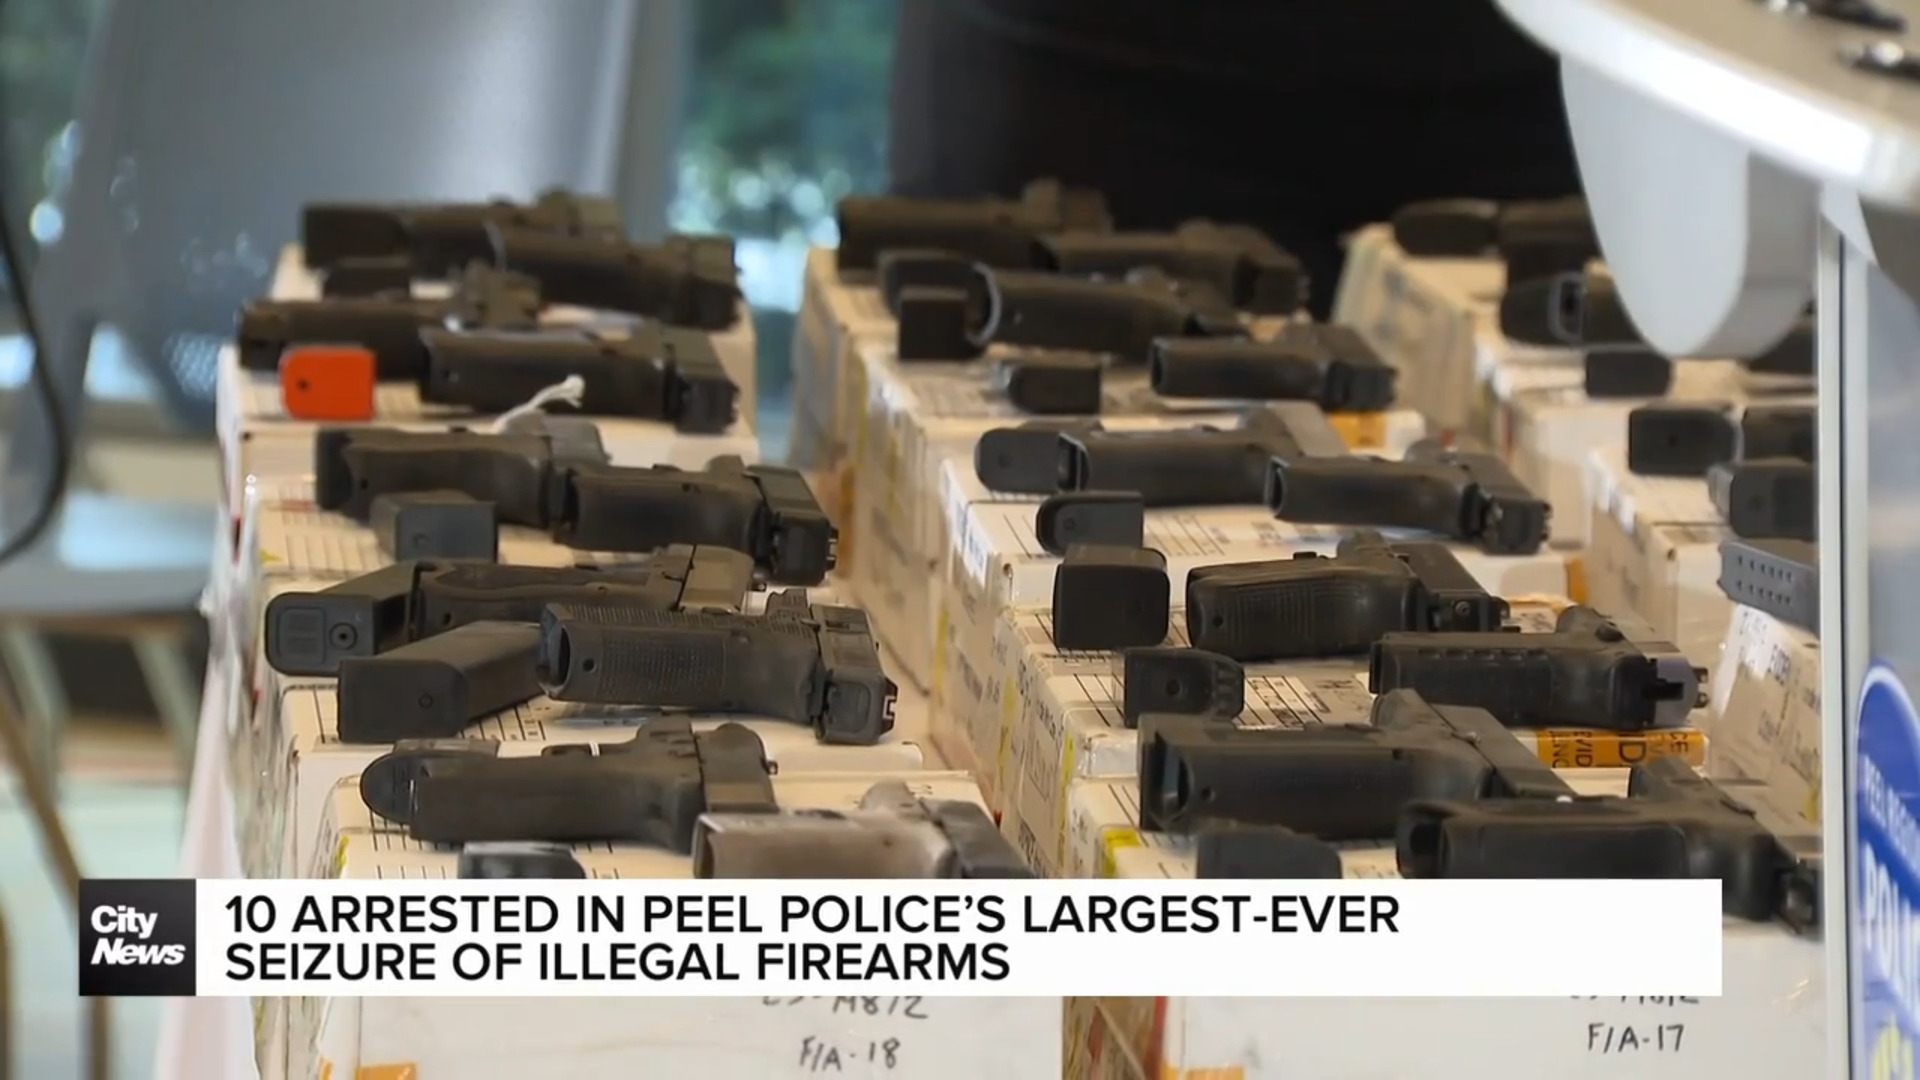 Peel police announce largest-ever seizure of illegal firearms